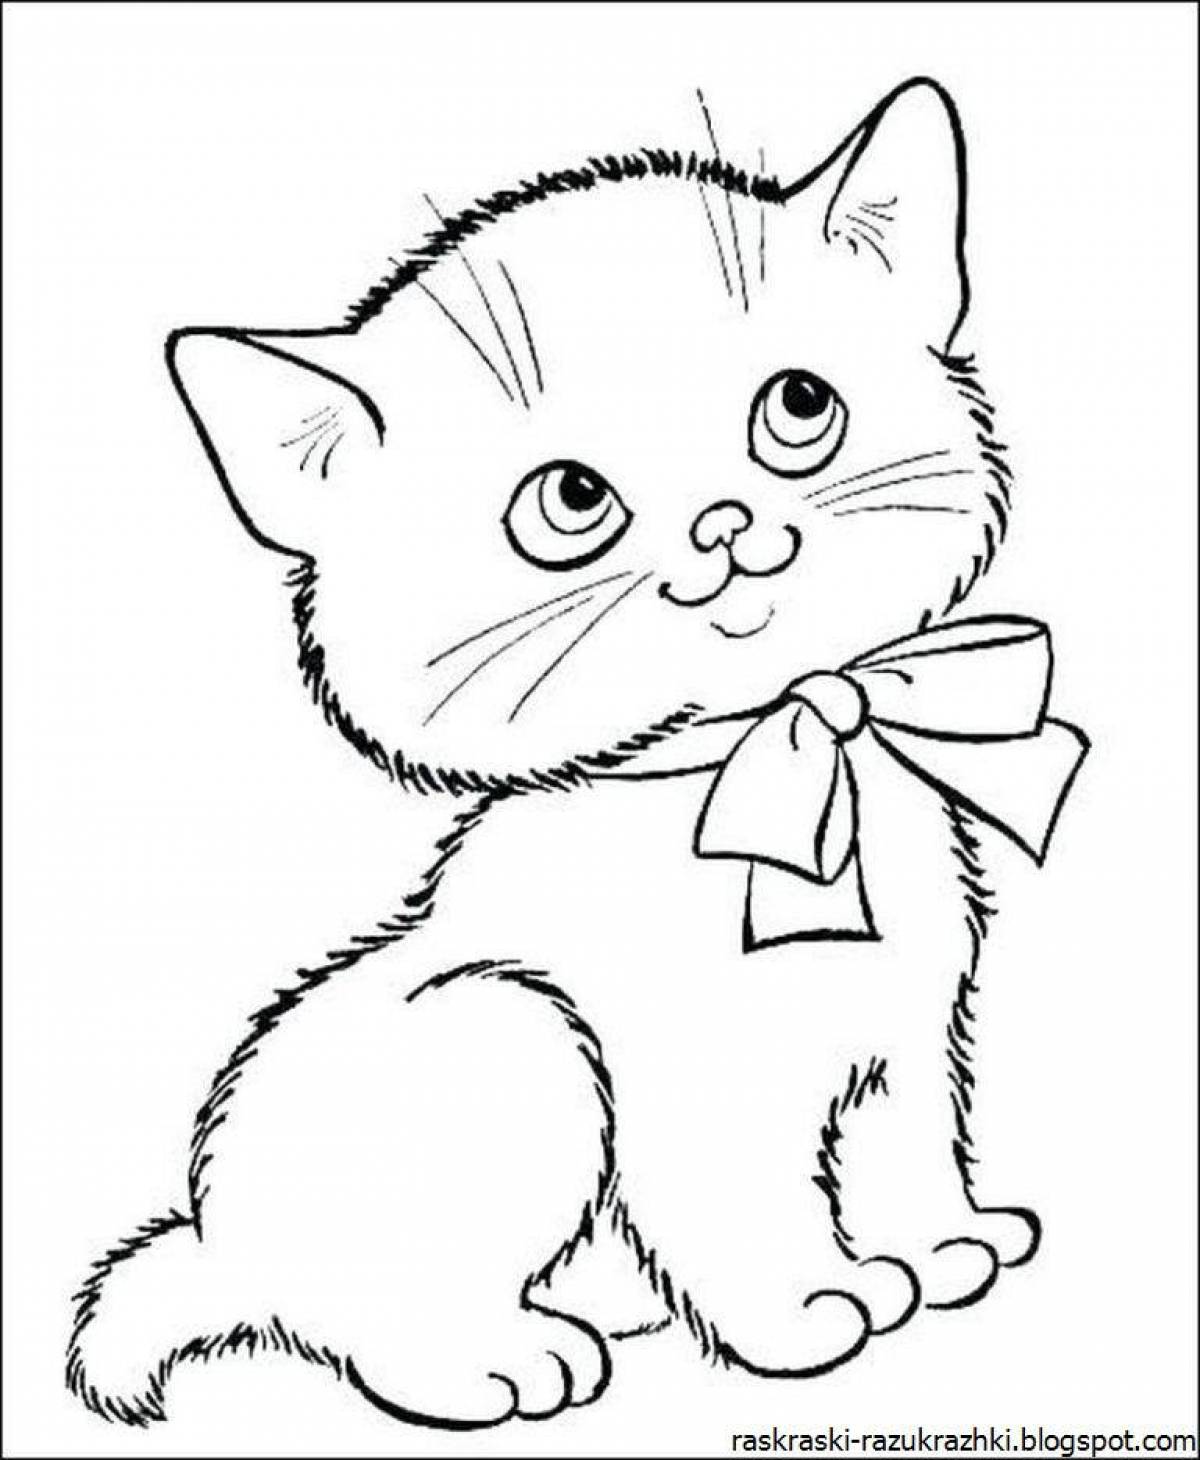 Funny cat coloring pages for kids